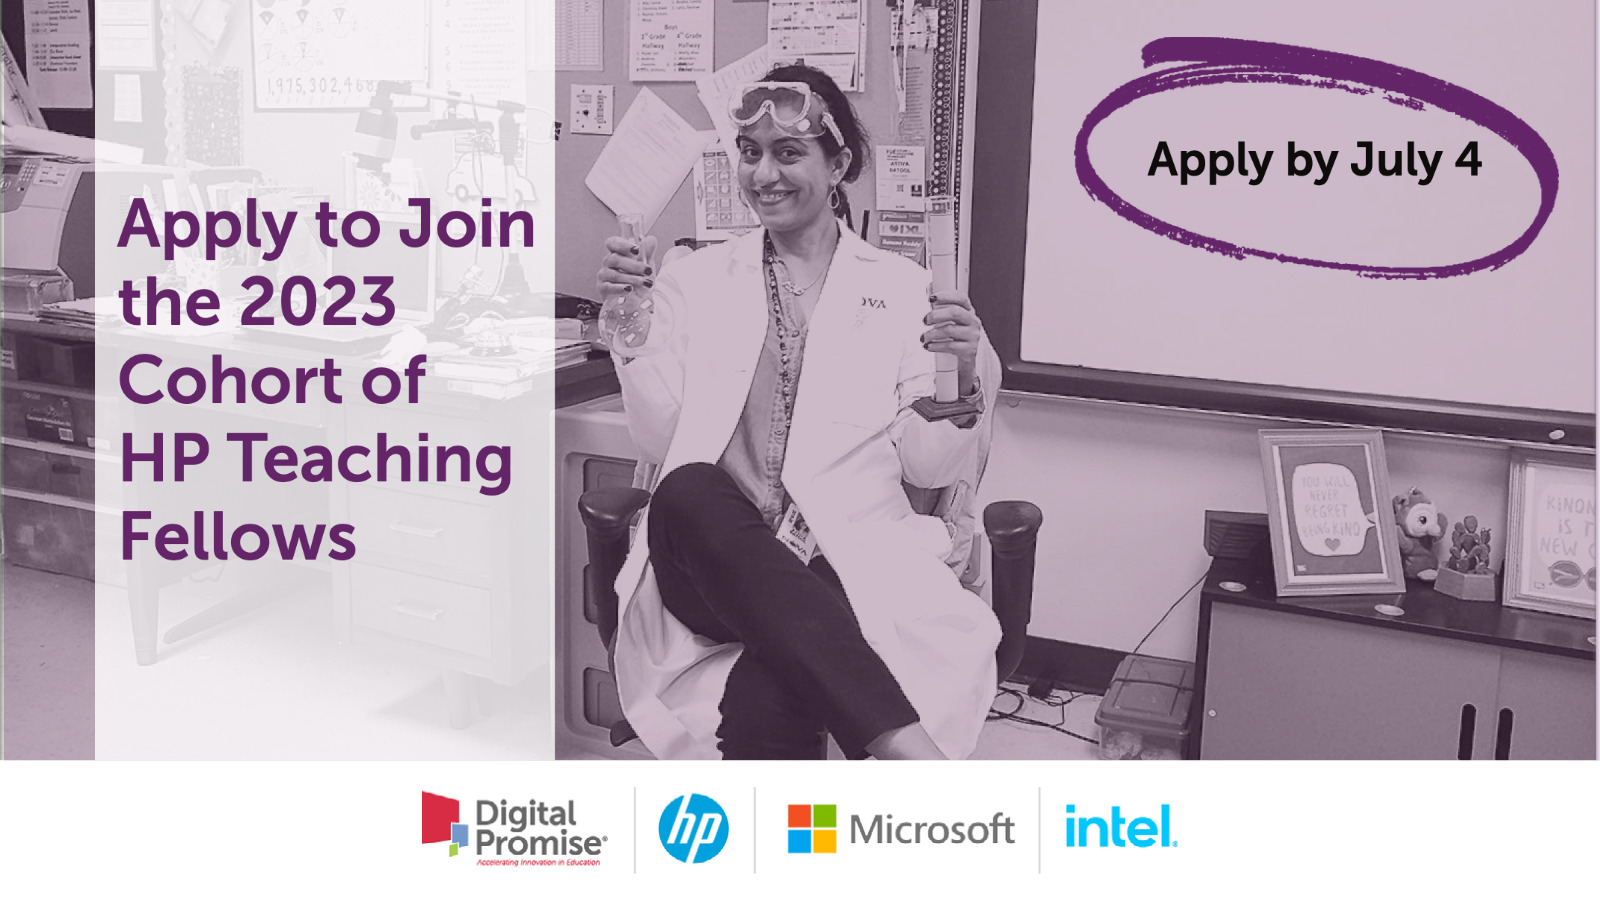 A teacher in a lab coat holding up a graduated cylinder. Text next to her reads Apply to Join the 2023 Cohort of HP Teaching Fellows. Apply by July 4